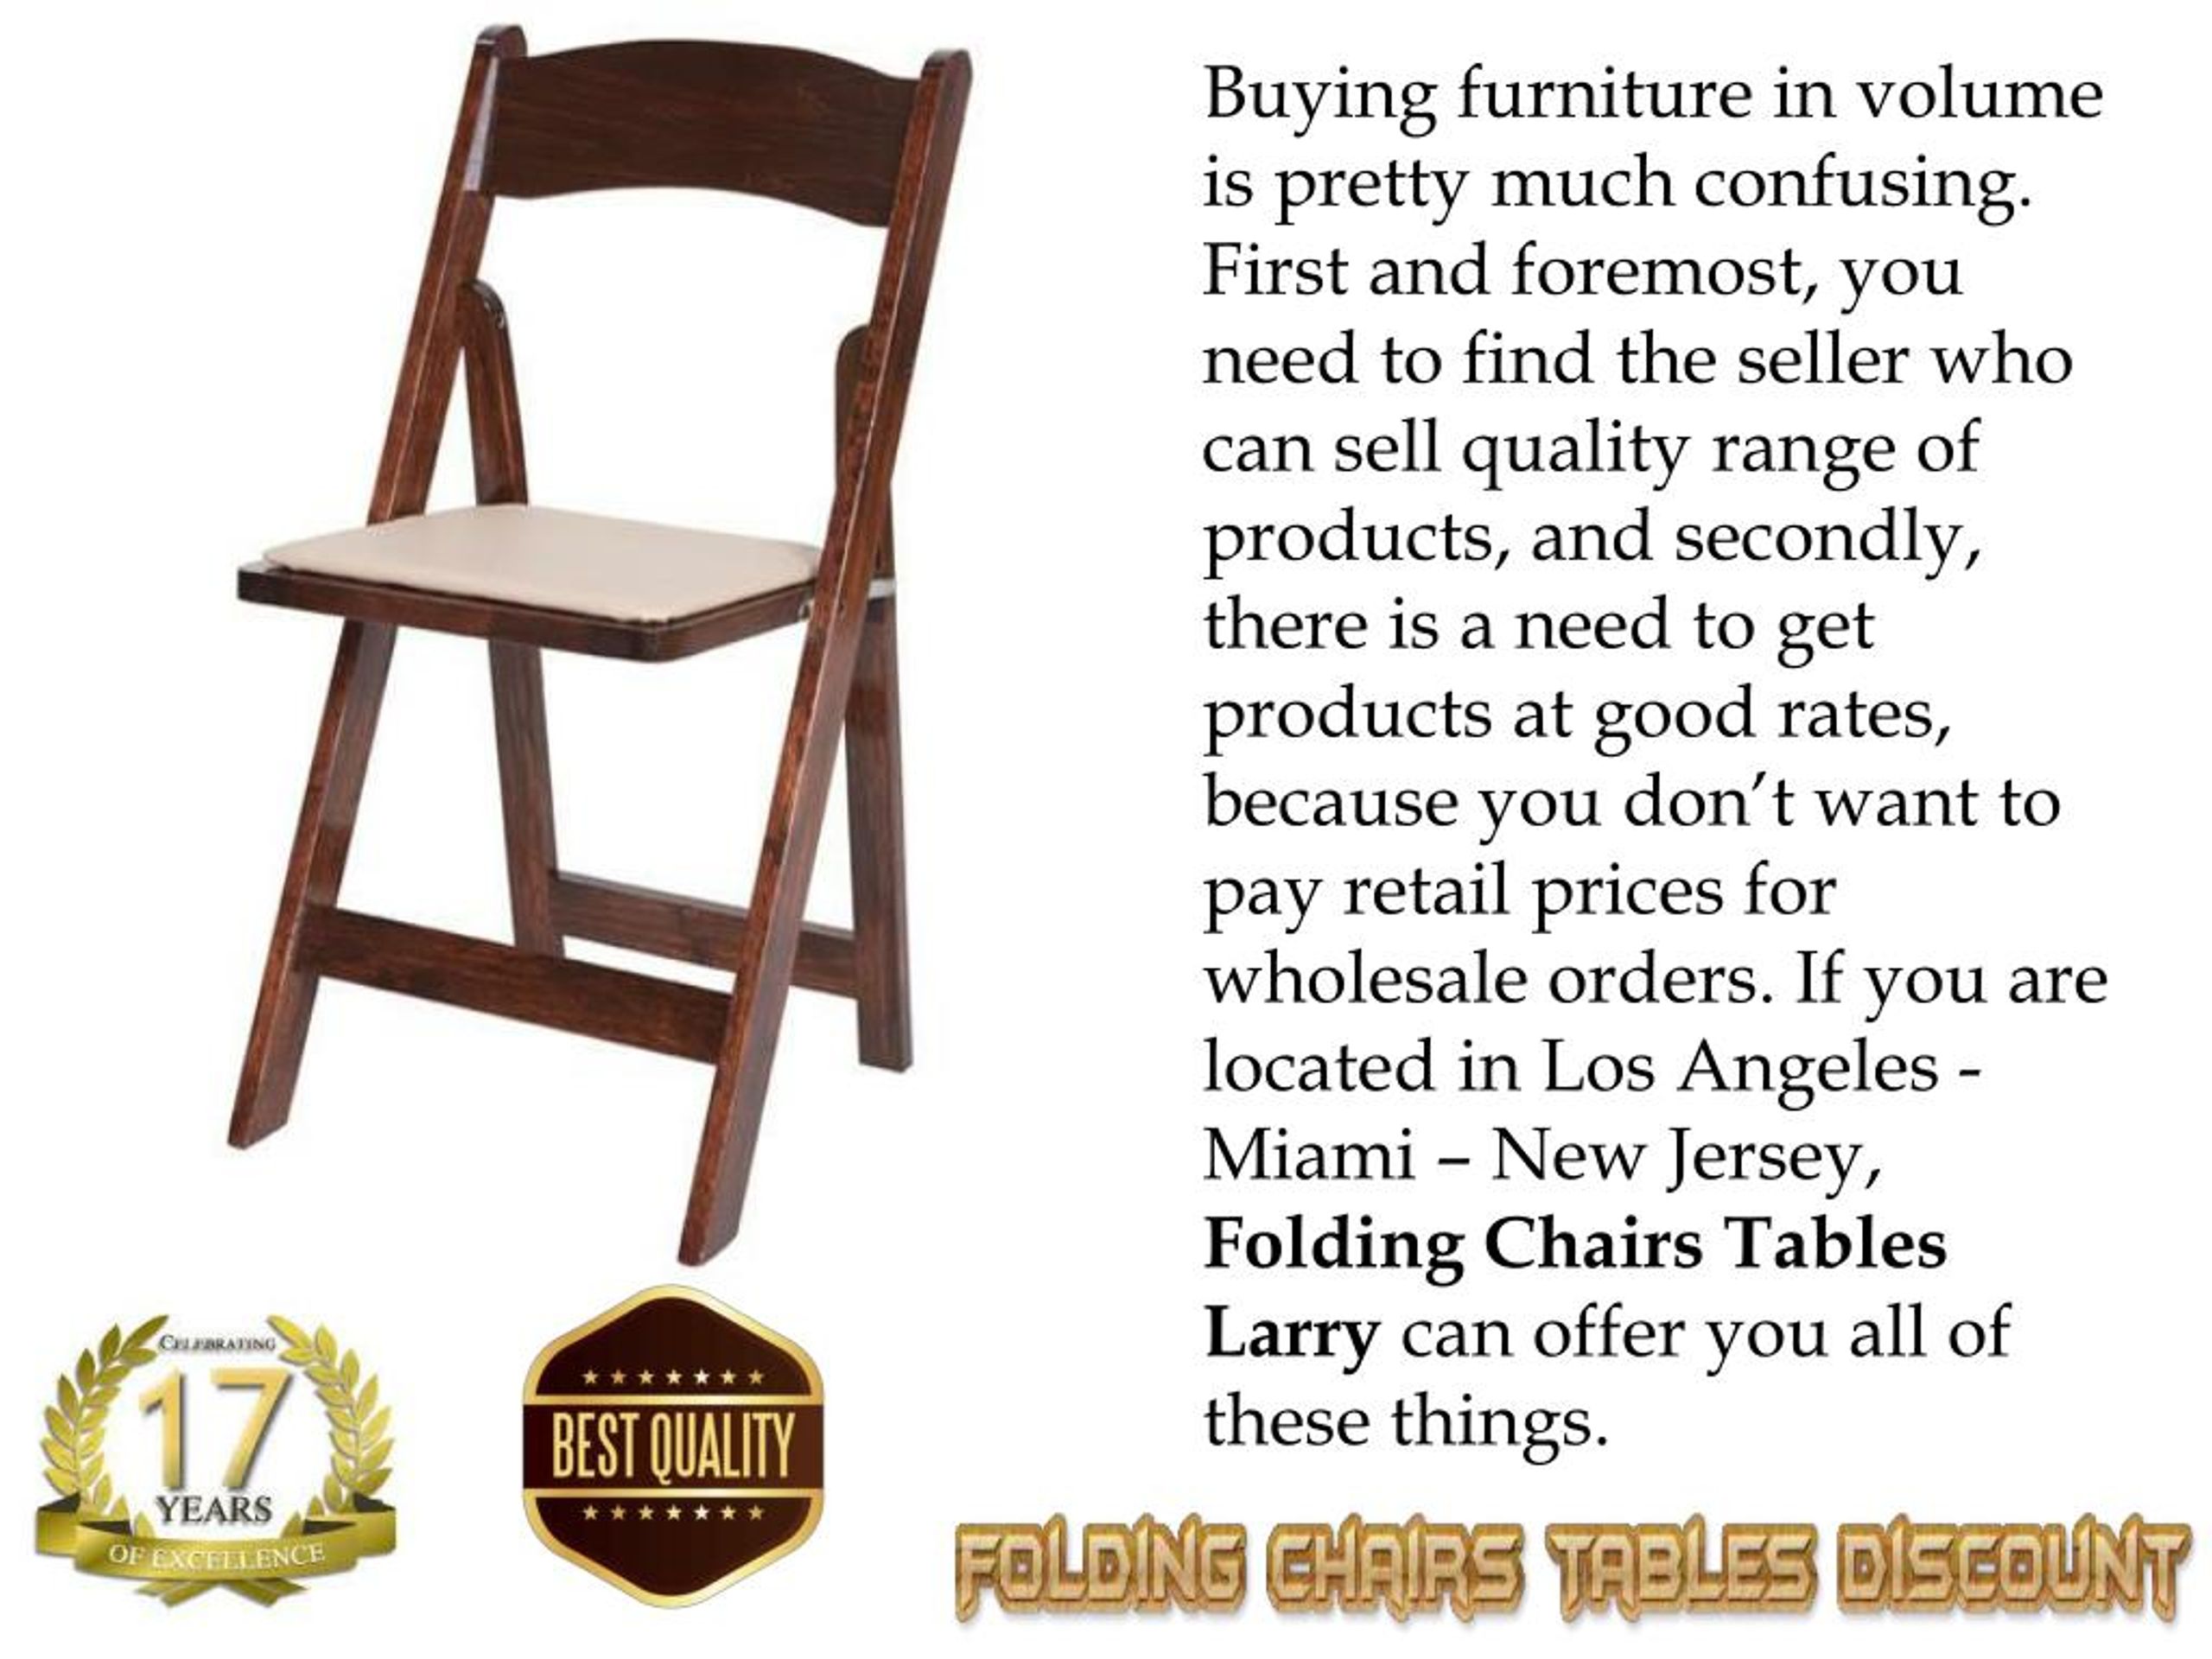 Ppt Folding Chairs Tables Larry Introduces Great Furniture Deals